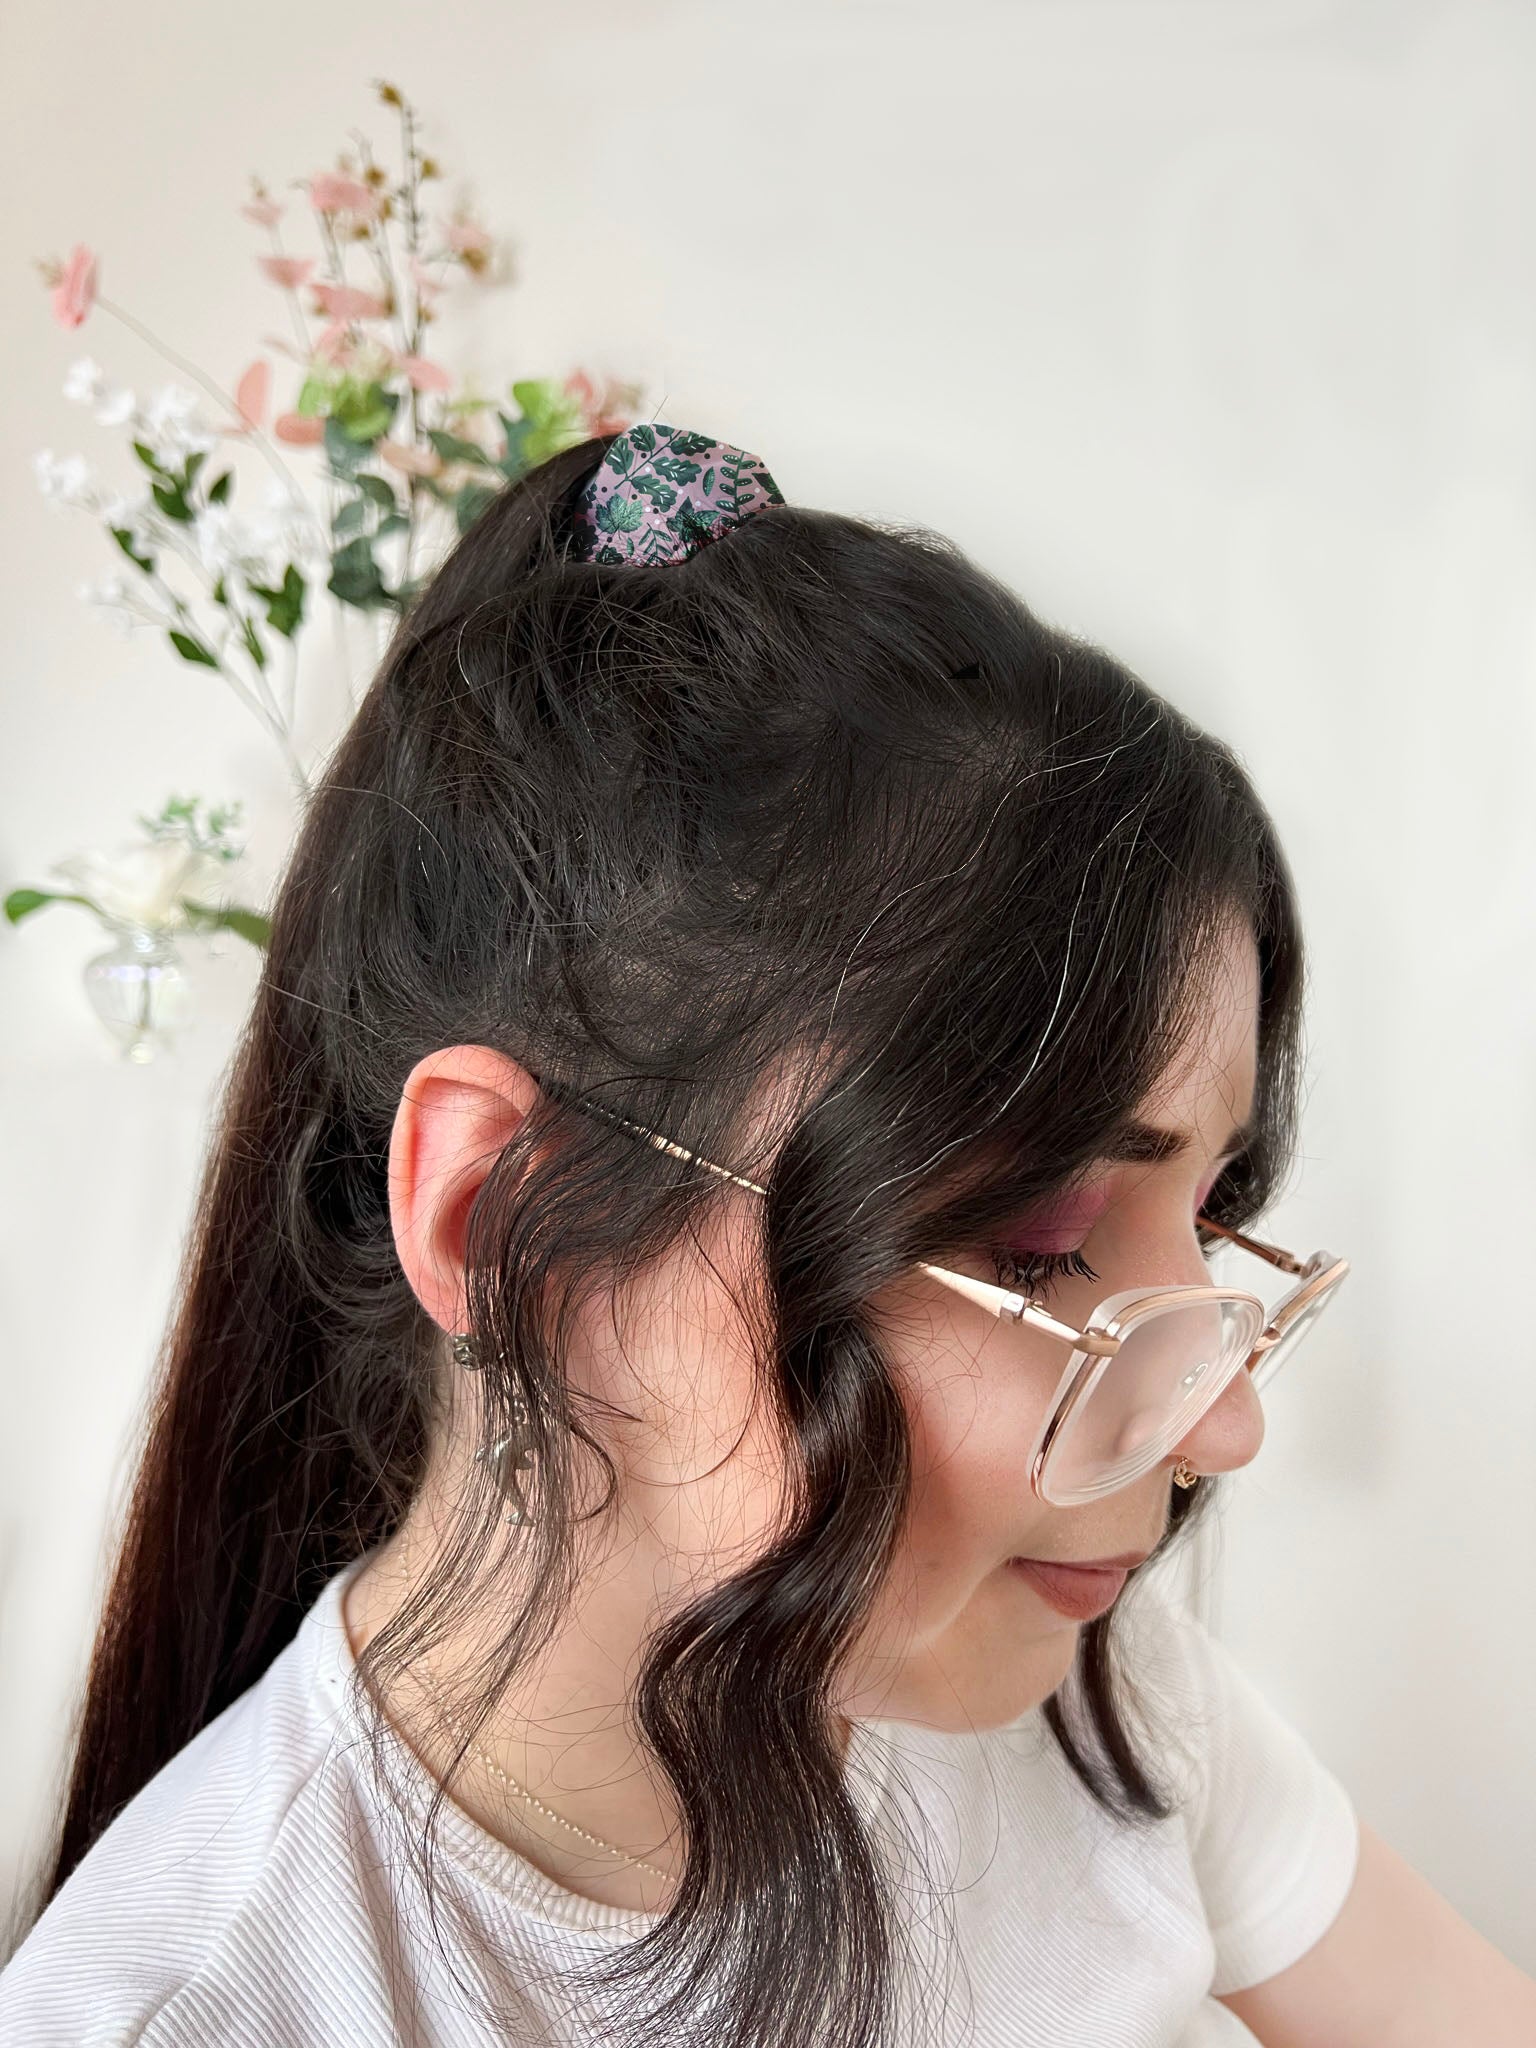 dark haired girl with glasses and ponytail with a scrunchie securing it.  The scrunchie has a green leafy pattern illustrated on it, with a pink background.